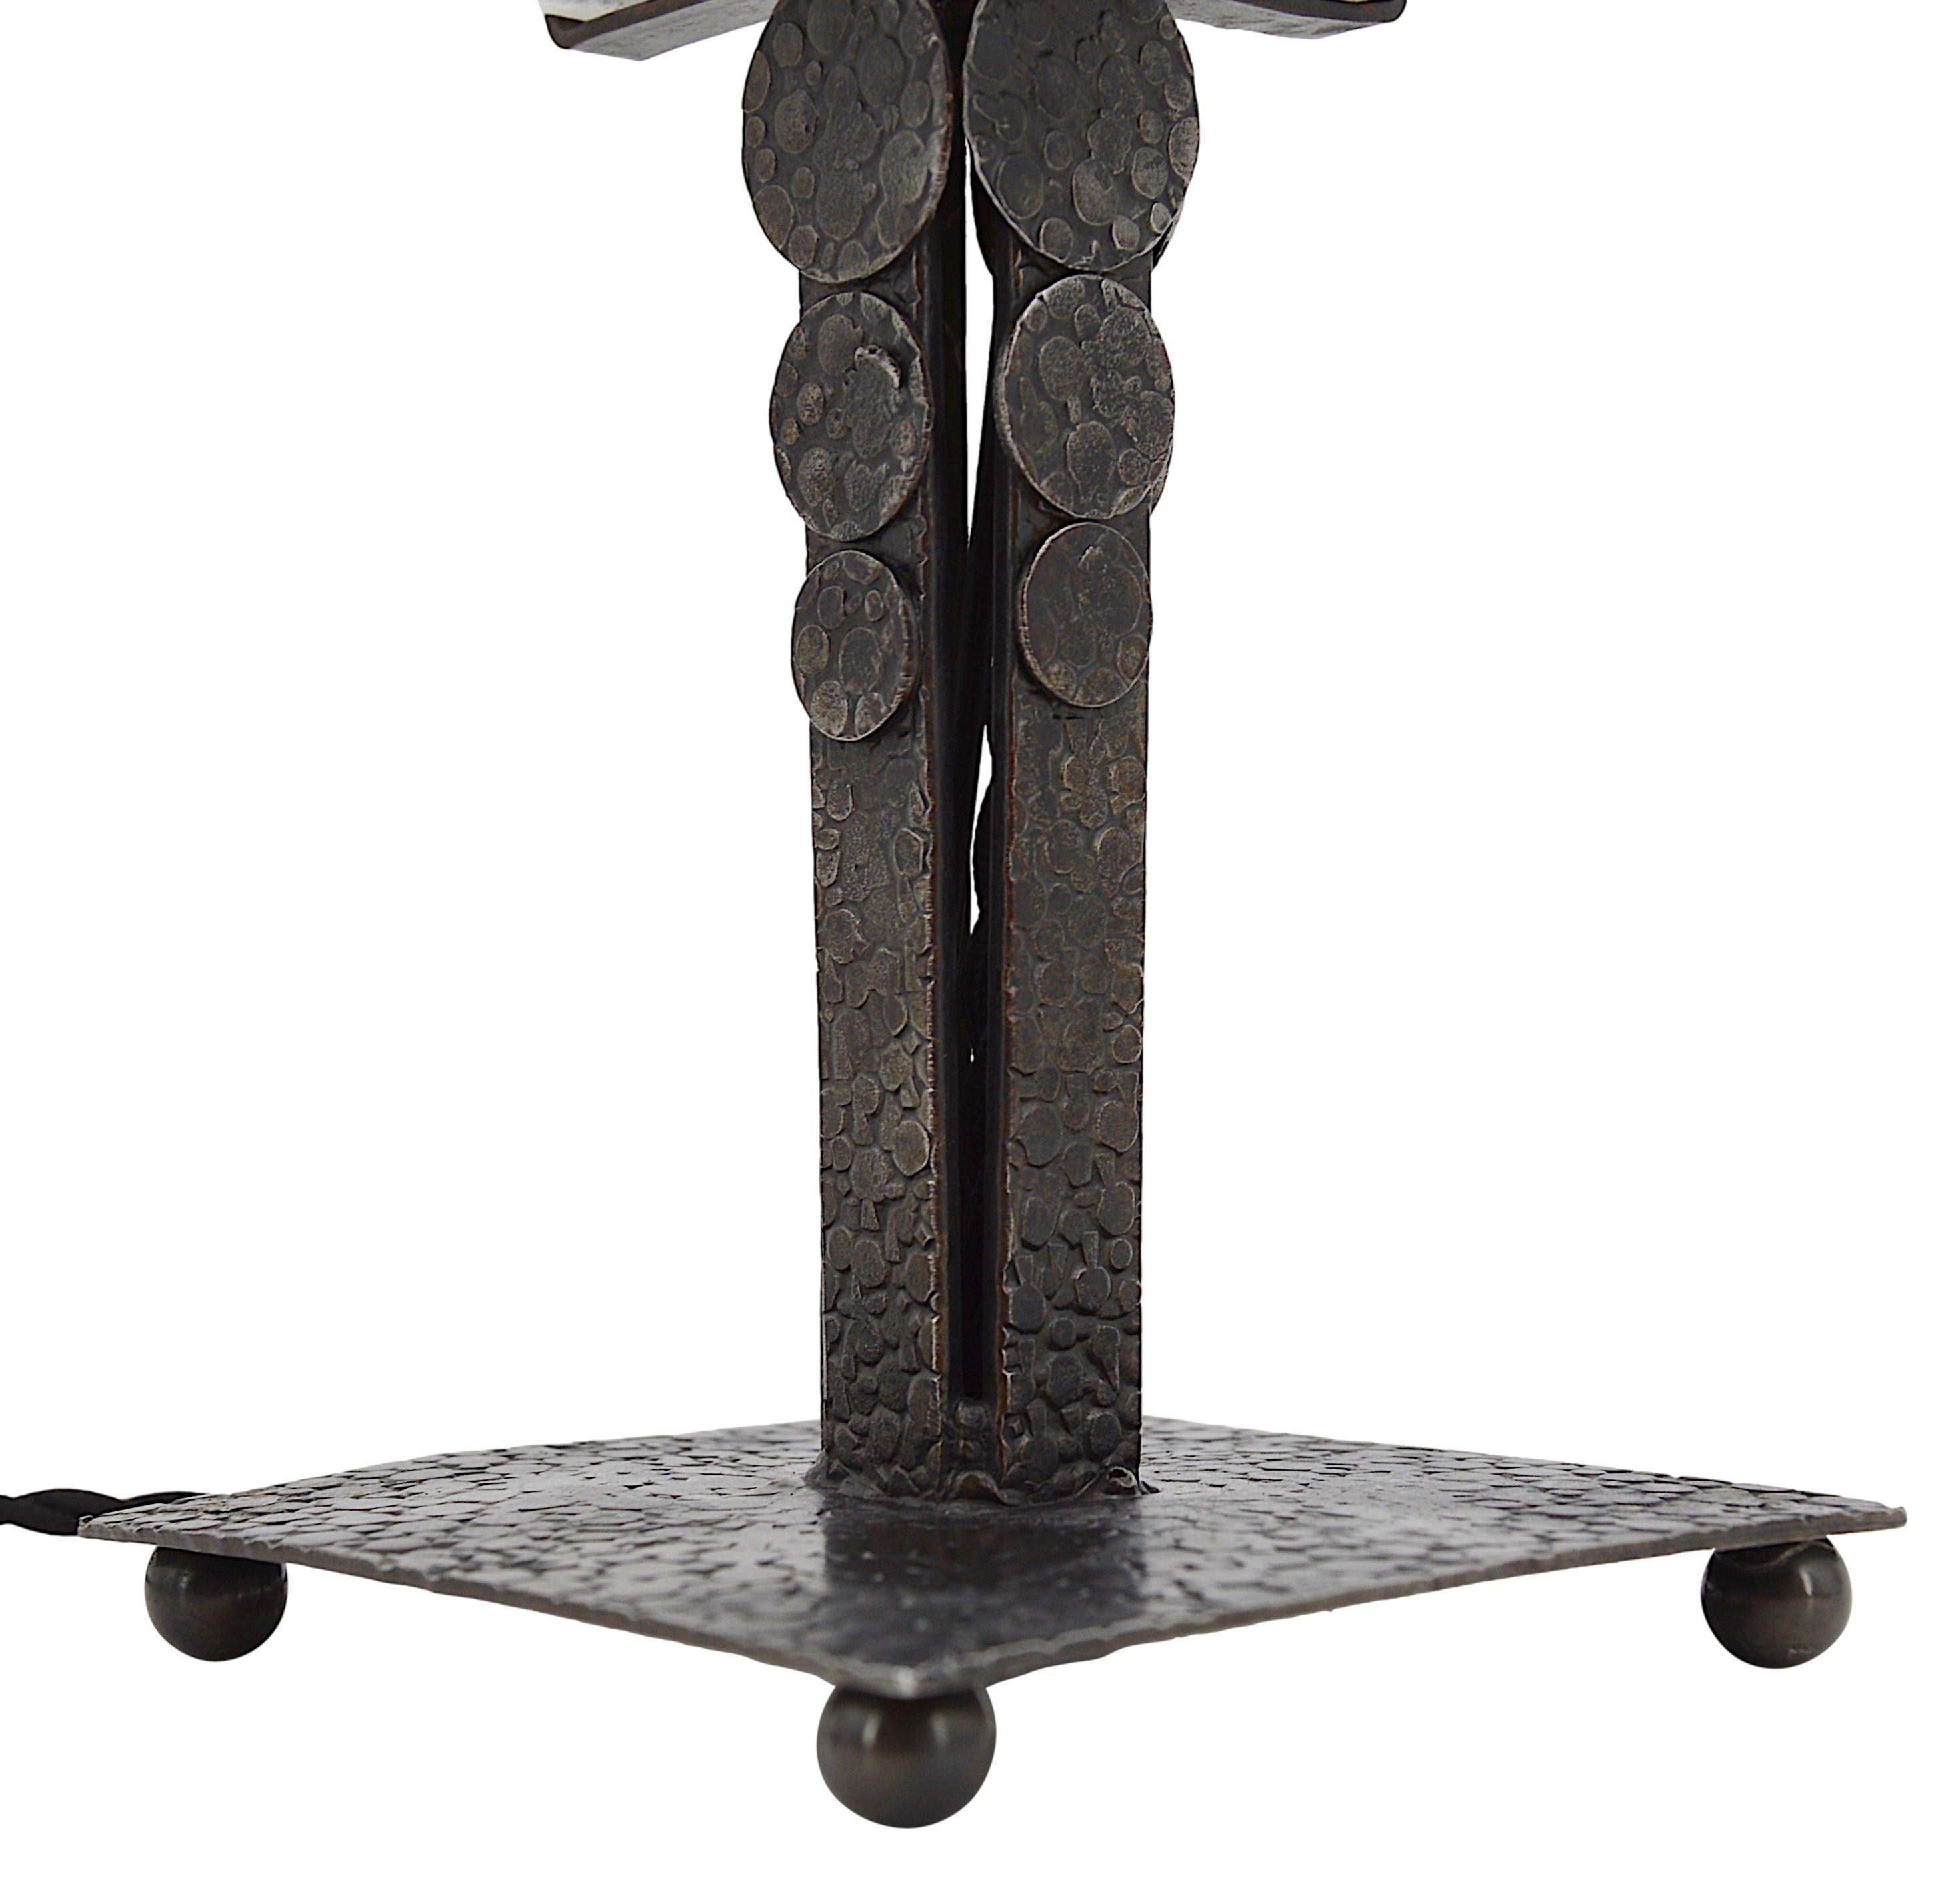 Mid-20th Century Pierre Gilles French Art Deco Wrought-Iron Table Lamp, ca. 1930 For Sale